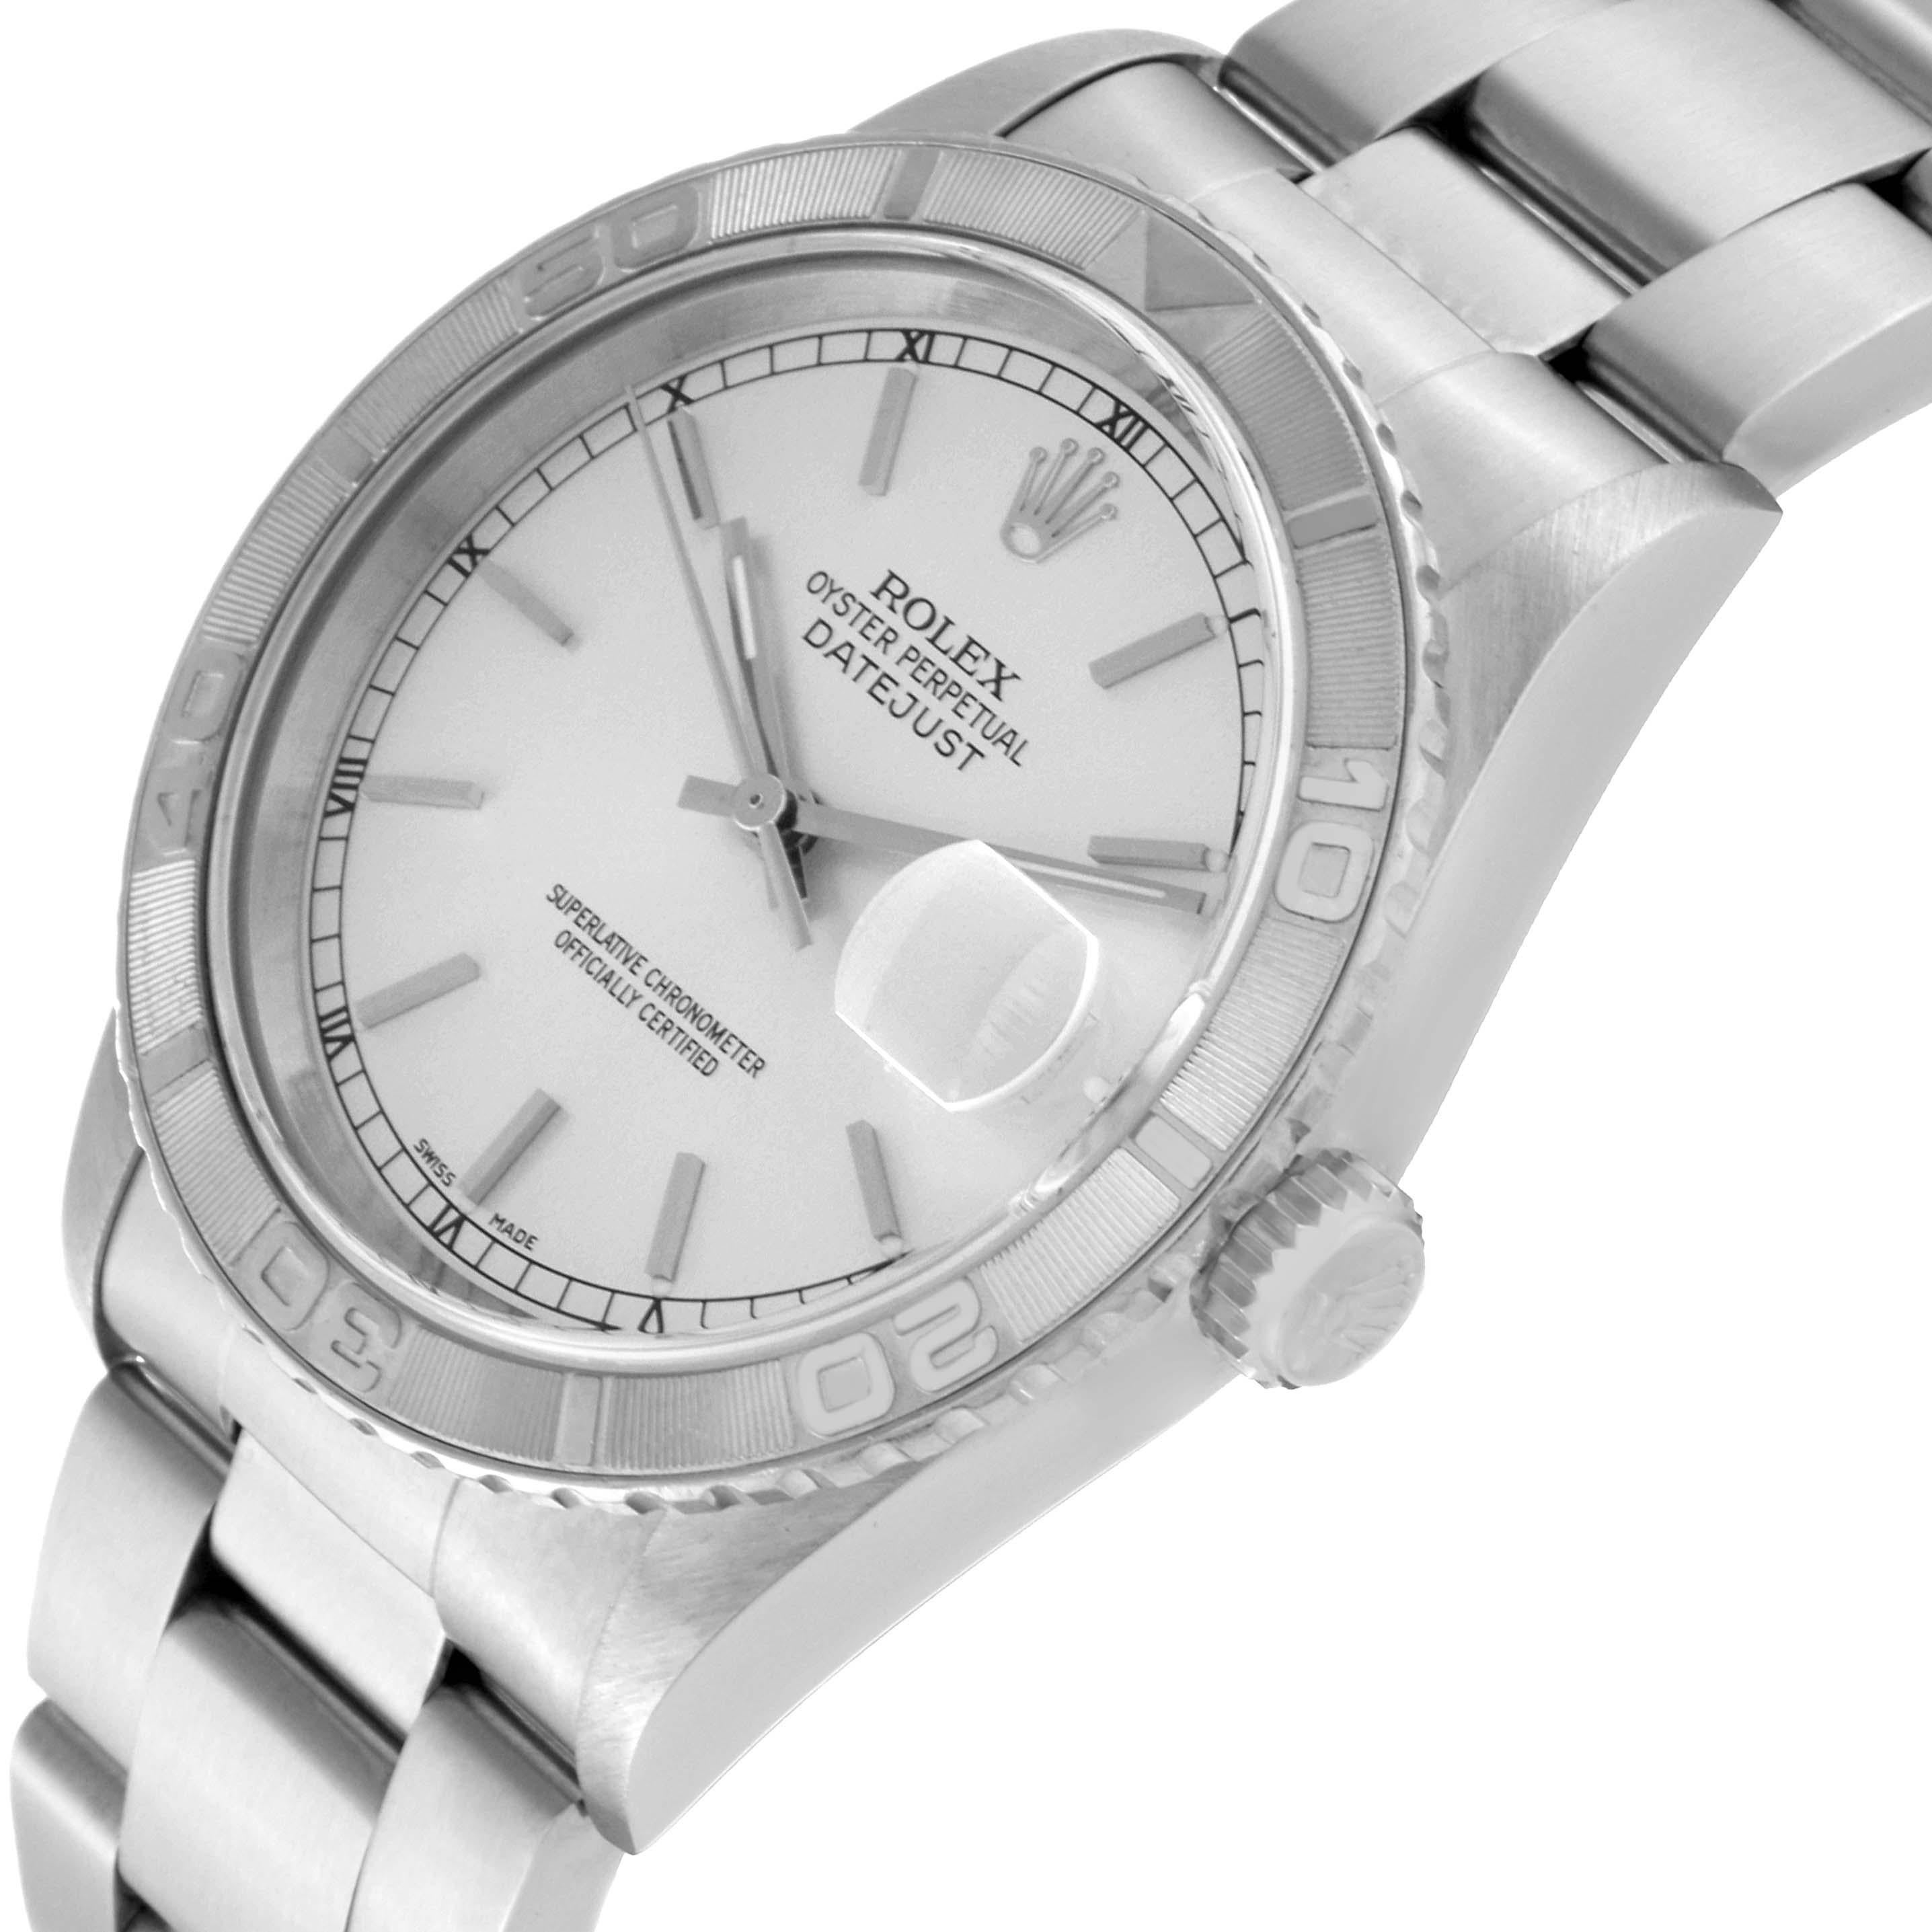 Rolex Datejust Turnograph Steel White Gold Mens Watch 16264 Box Papers. Officially certified chronometer automatic self-winding movement with quickset date function. Stainless steel case 36.0 mm in diameter. Rolex logo on the crown. 18k white gold